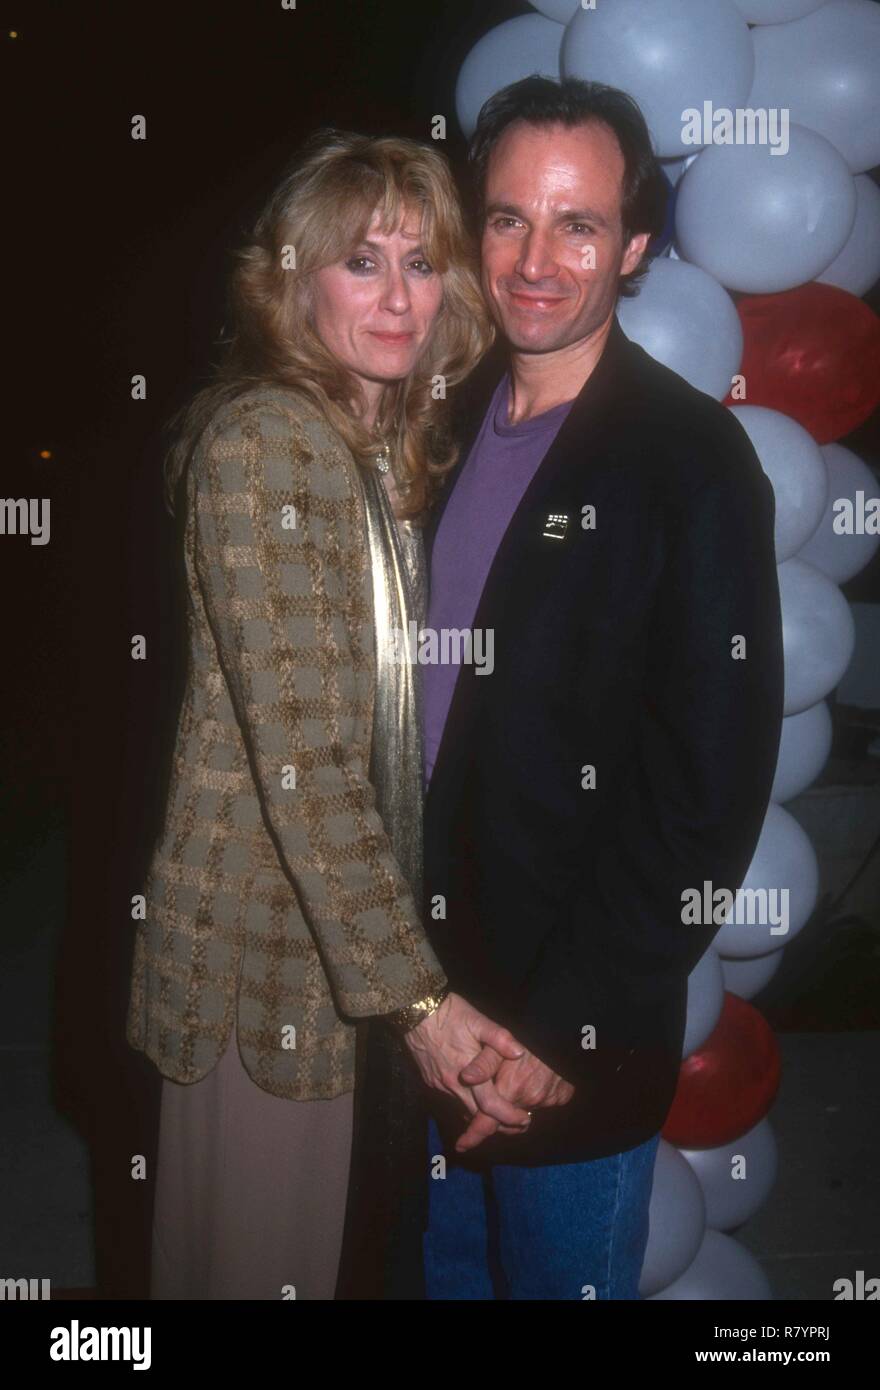 SANTA MONICA, CA - APRIL 8: Actress Judith Light and husband actor Robert Desiderio attend event on April 8, 1993 at The Museum of Flying in Santa Monica, California. Photo by Barry King/Alamy Stock Photo Stock Photo